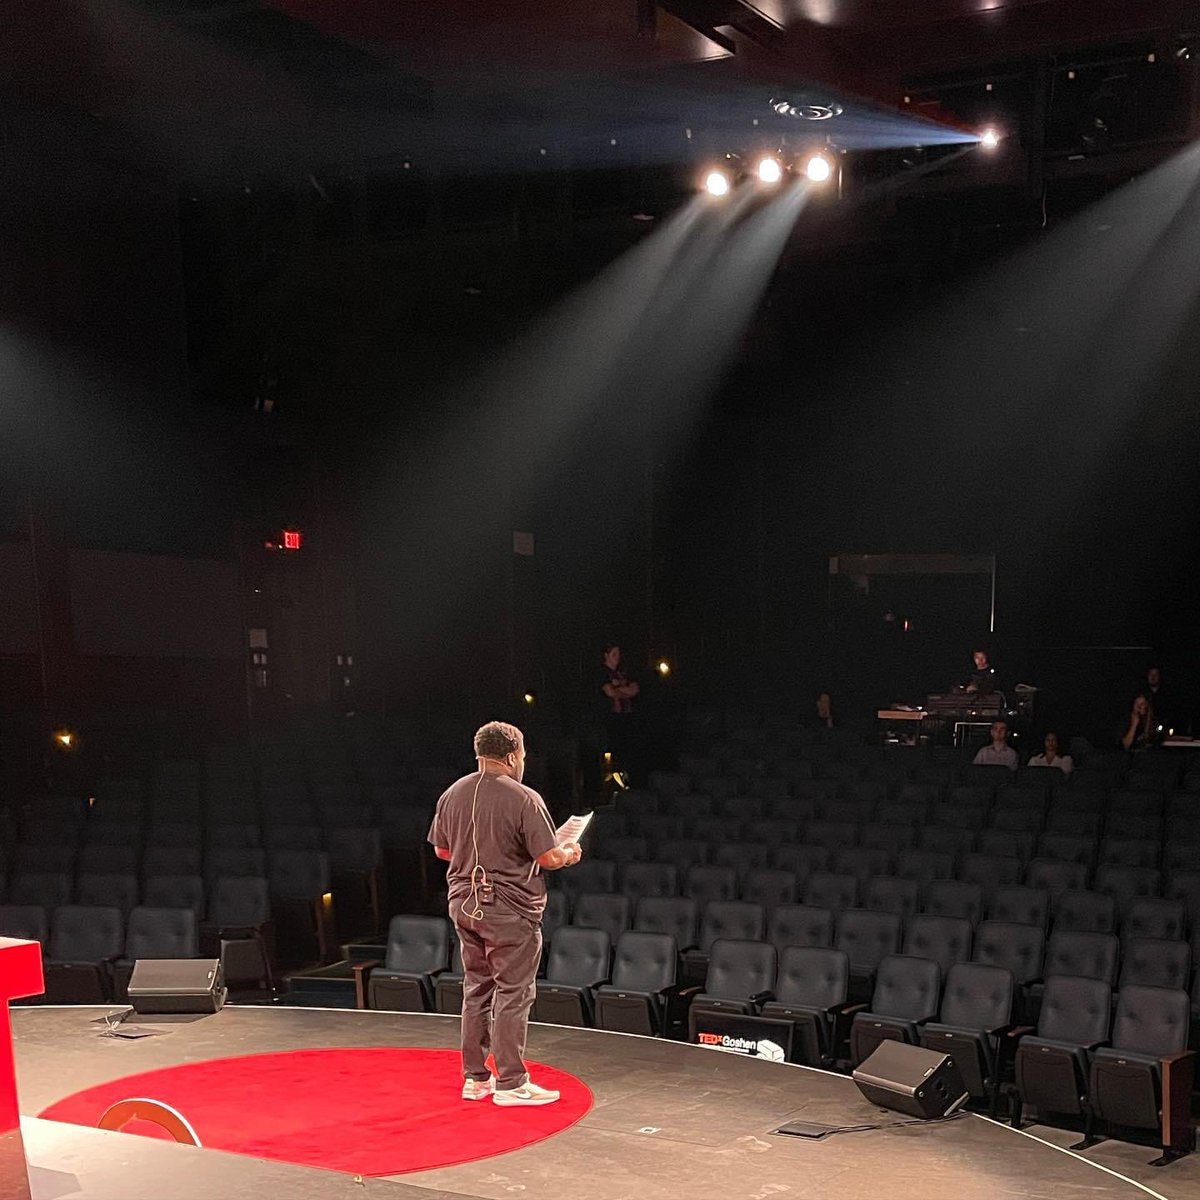 Fred Miles gave a #TEDxGoshen talk in 2021 titled “Defining Success” 2 years later he’s on our stage again as the host for our amazing night. Search his talk on YouTube! Soon those seats will be filled: get yours today! TEDxGoshen.com